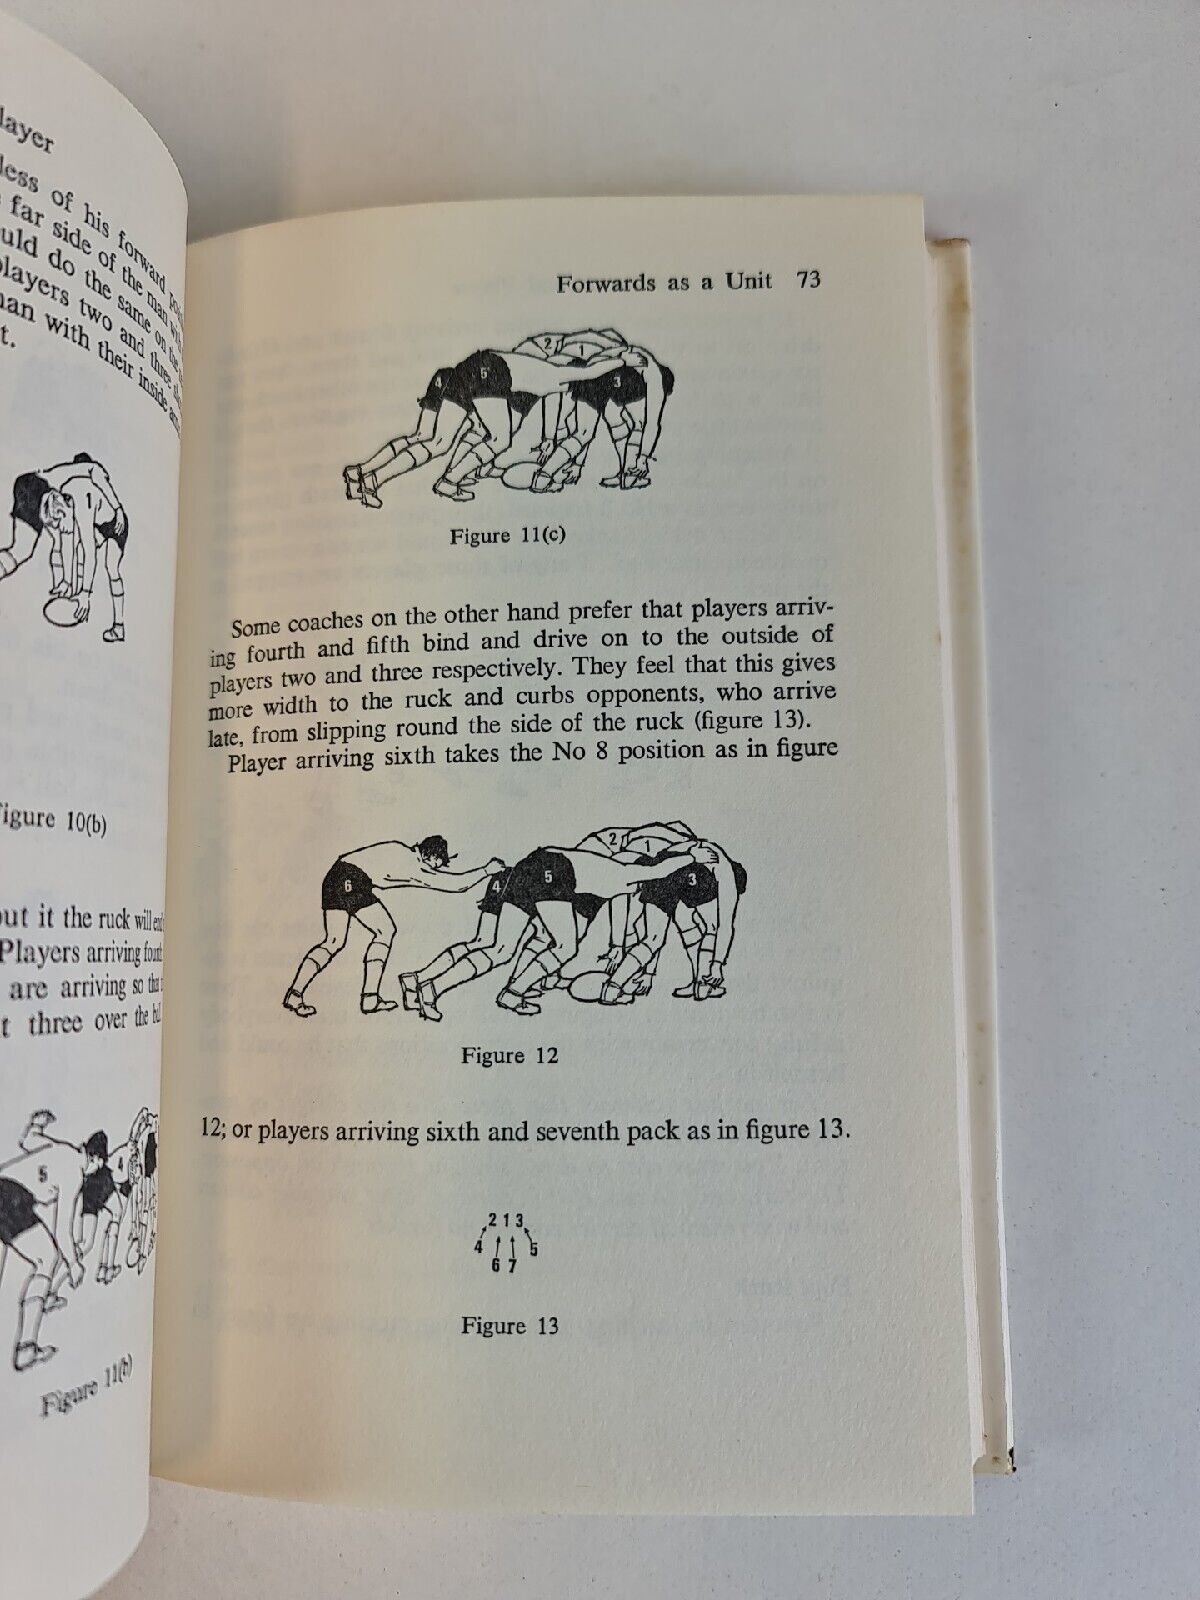 Rugby for Coach and Player by Don Rutherford (1971)